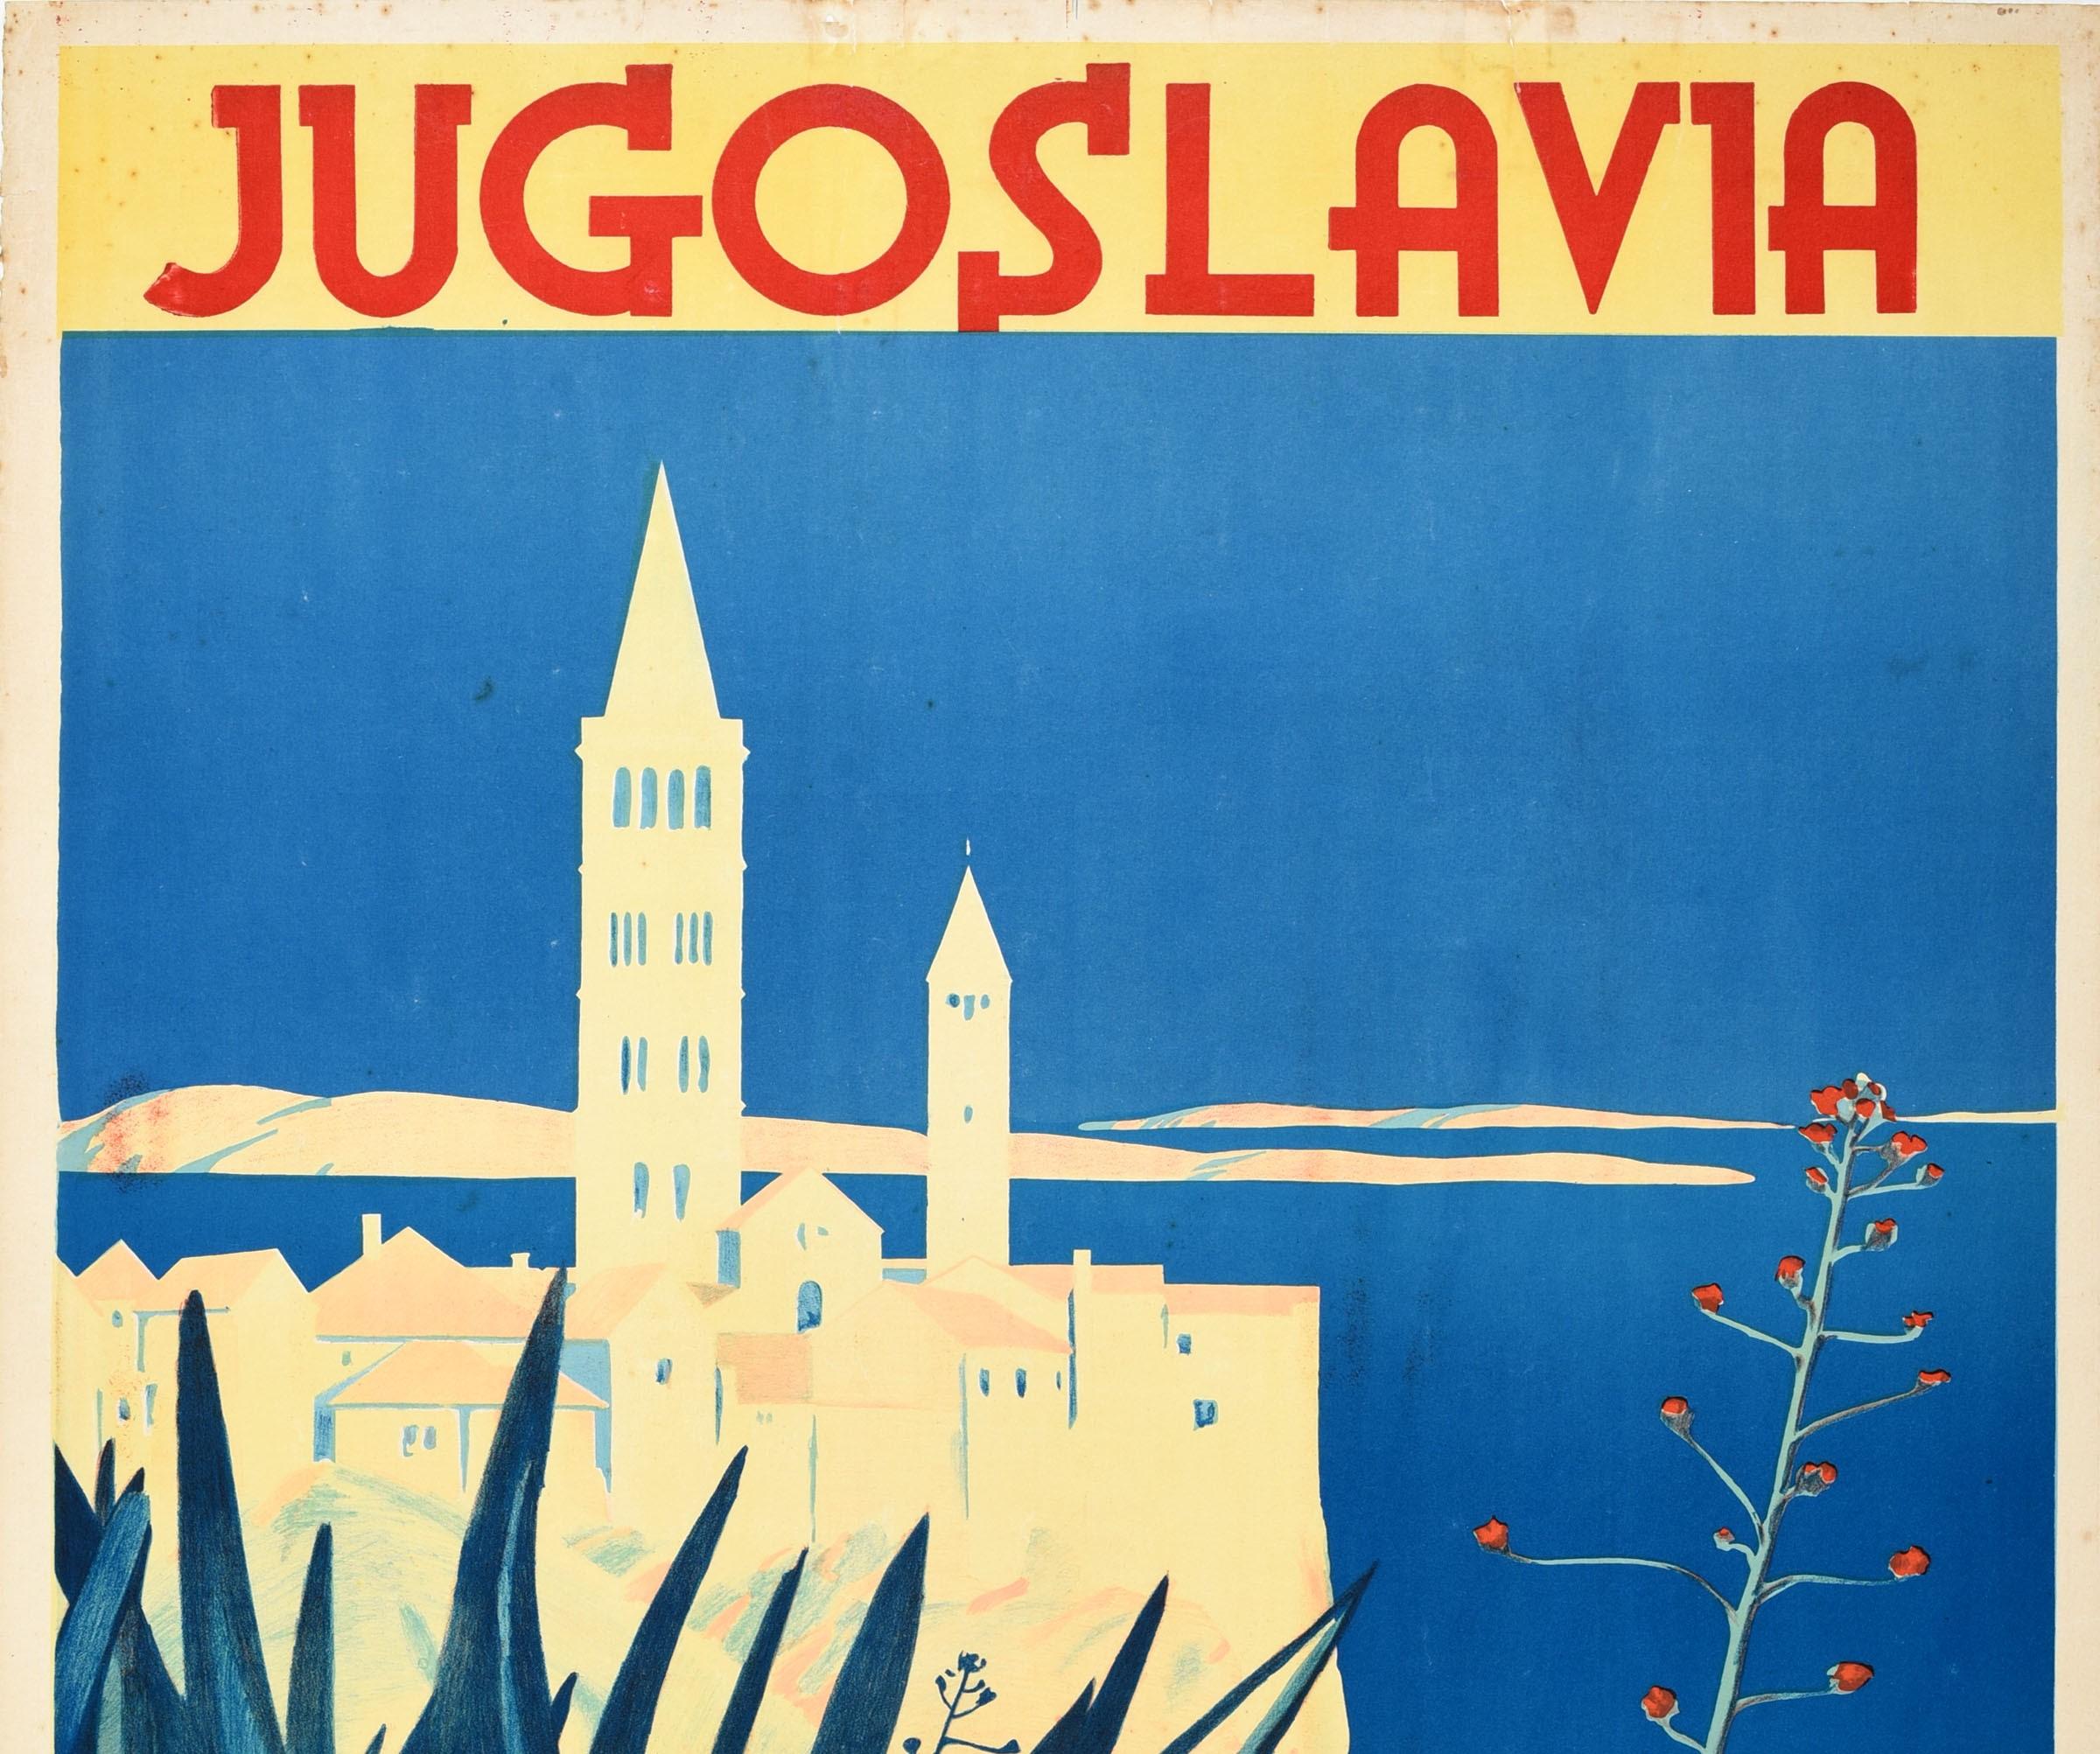 Original vintage travel poster for Putnik Jugoslavia / Yugoslavia featuring a stunning view of the historic buildings over the blue sea with hills in the distance and plants in the foreground, the bold red title text and information on a yellow